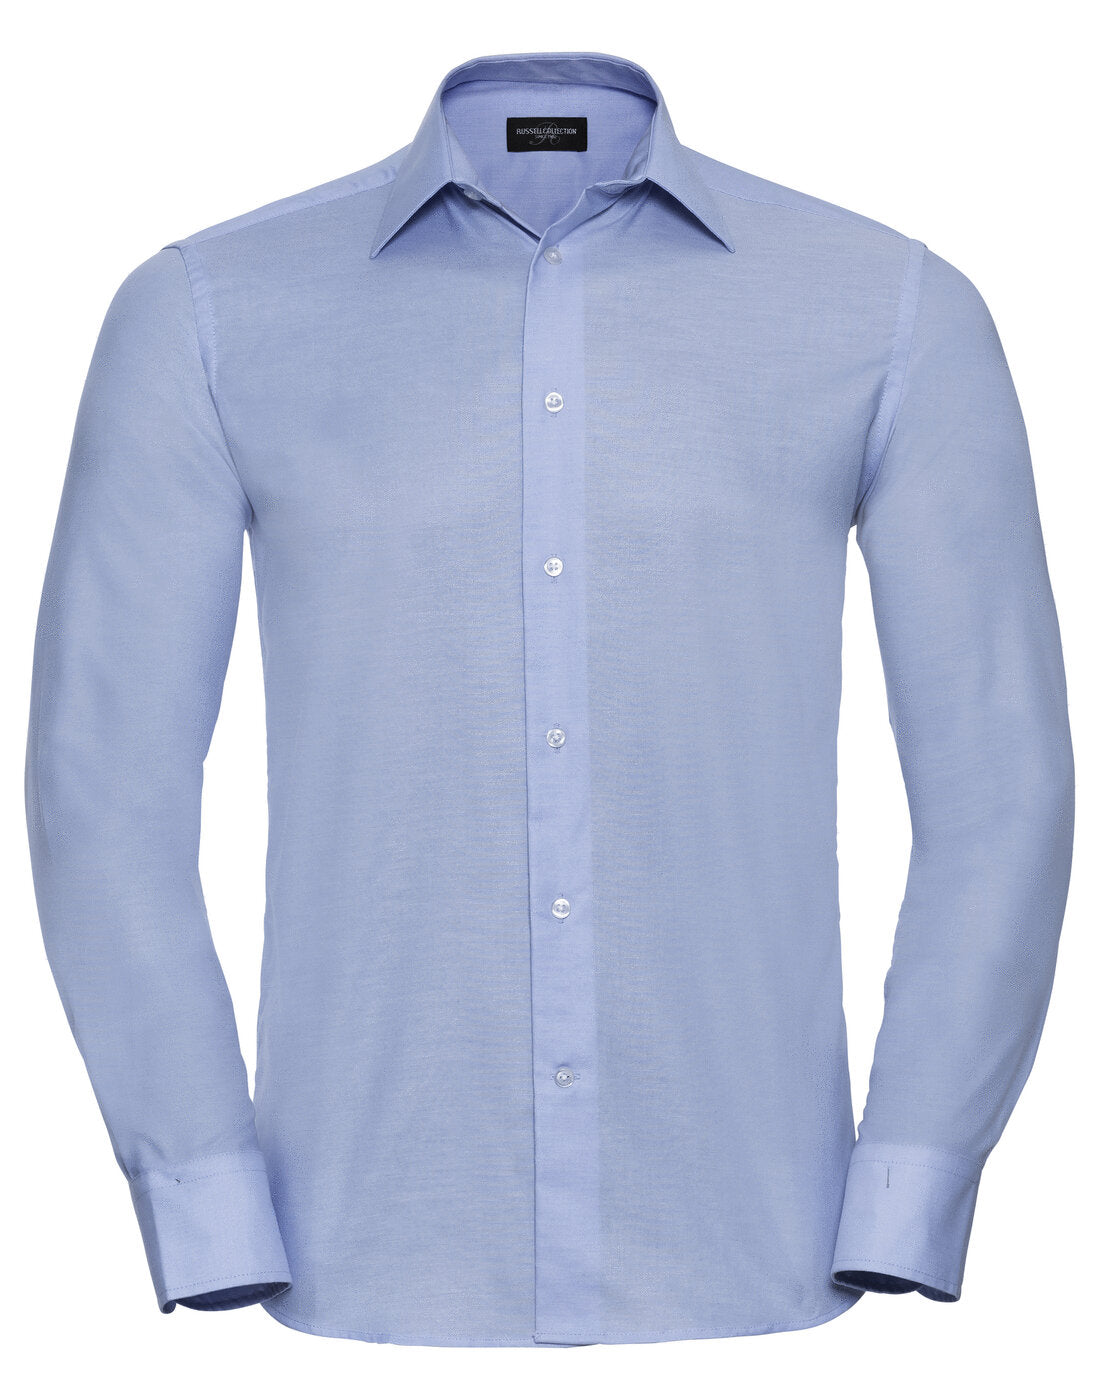 Russell Long Sleeve Tailored Oxford Shirt Oxford Blue